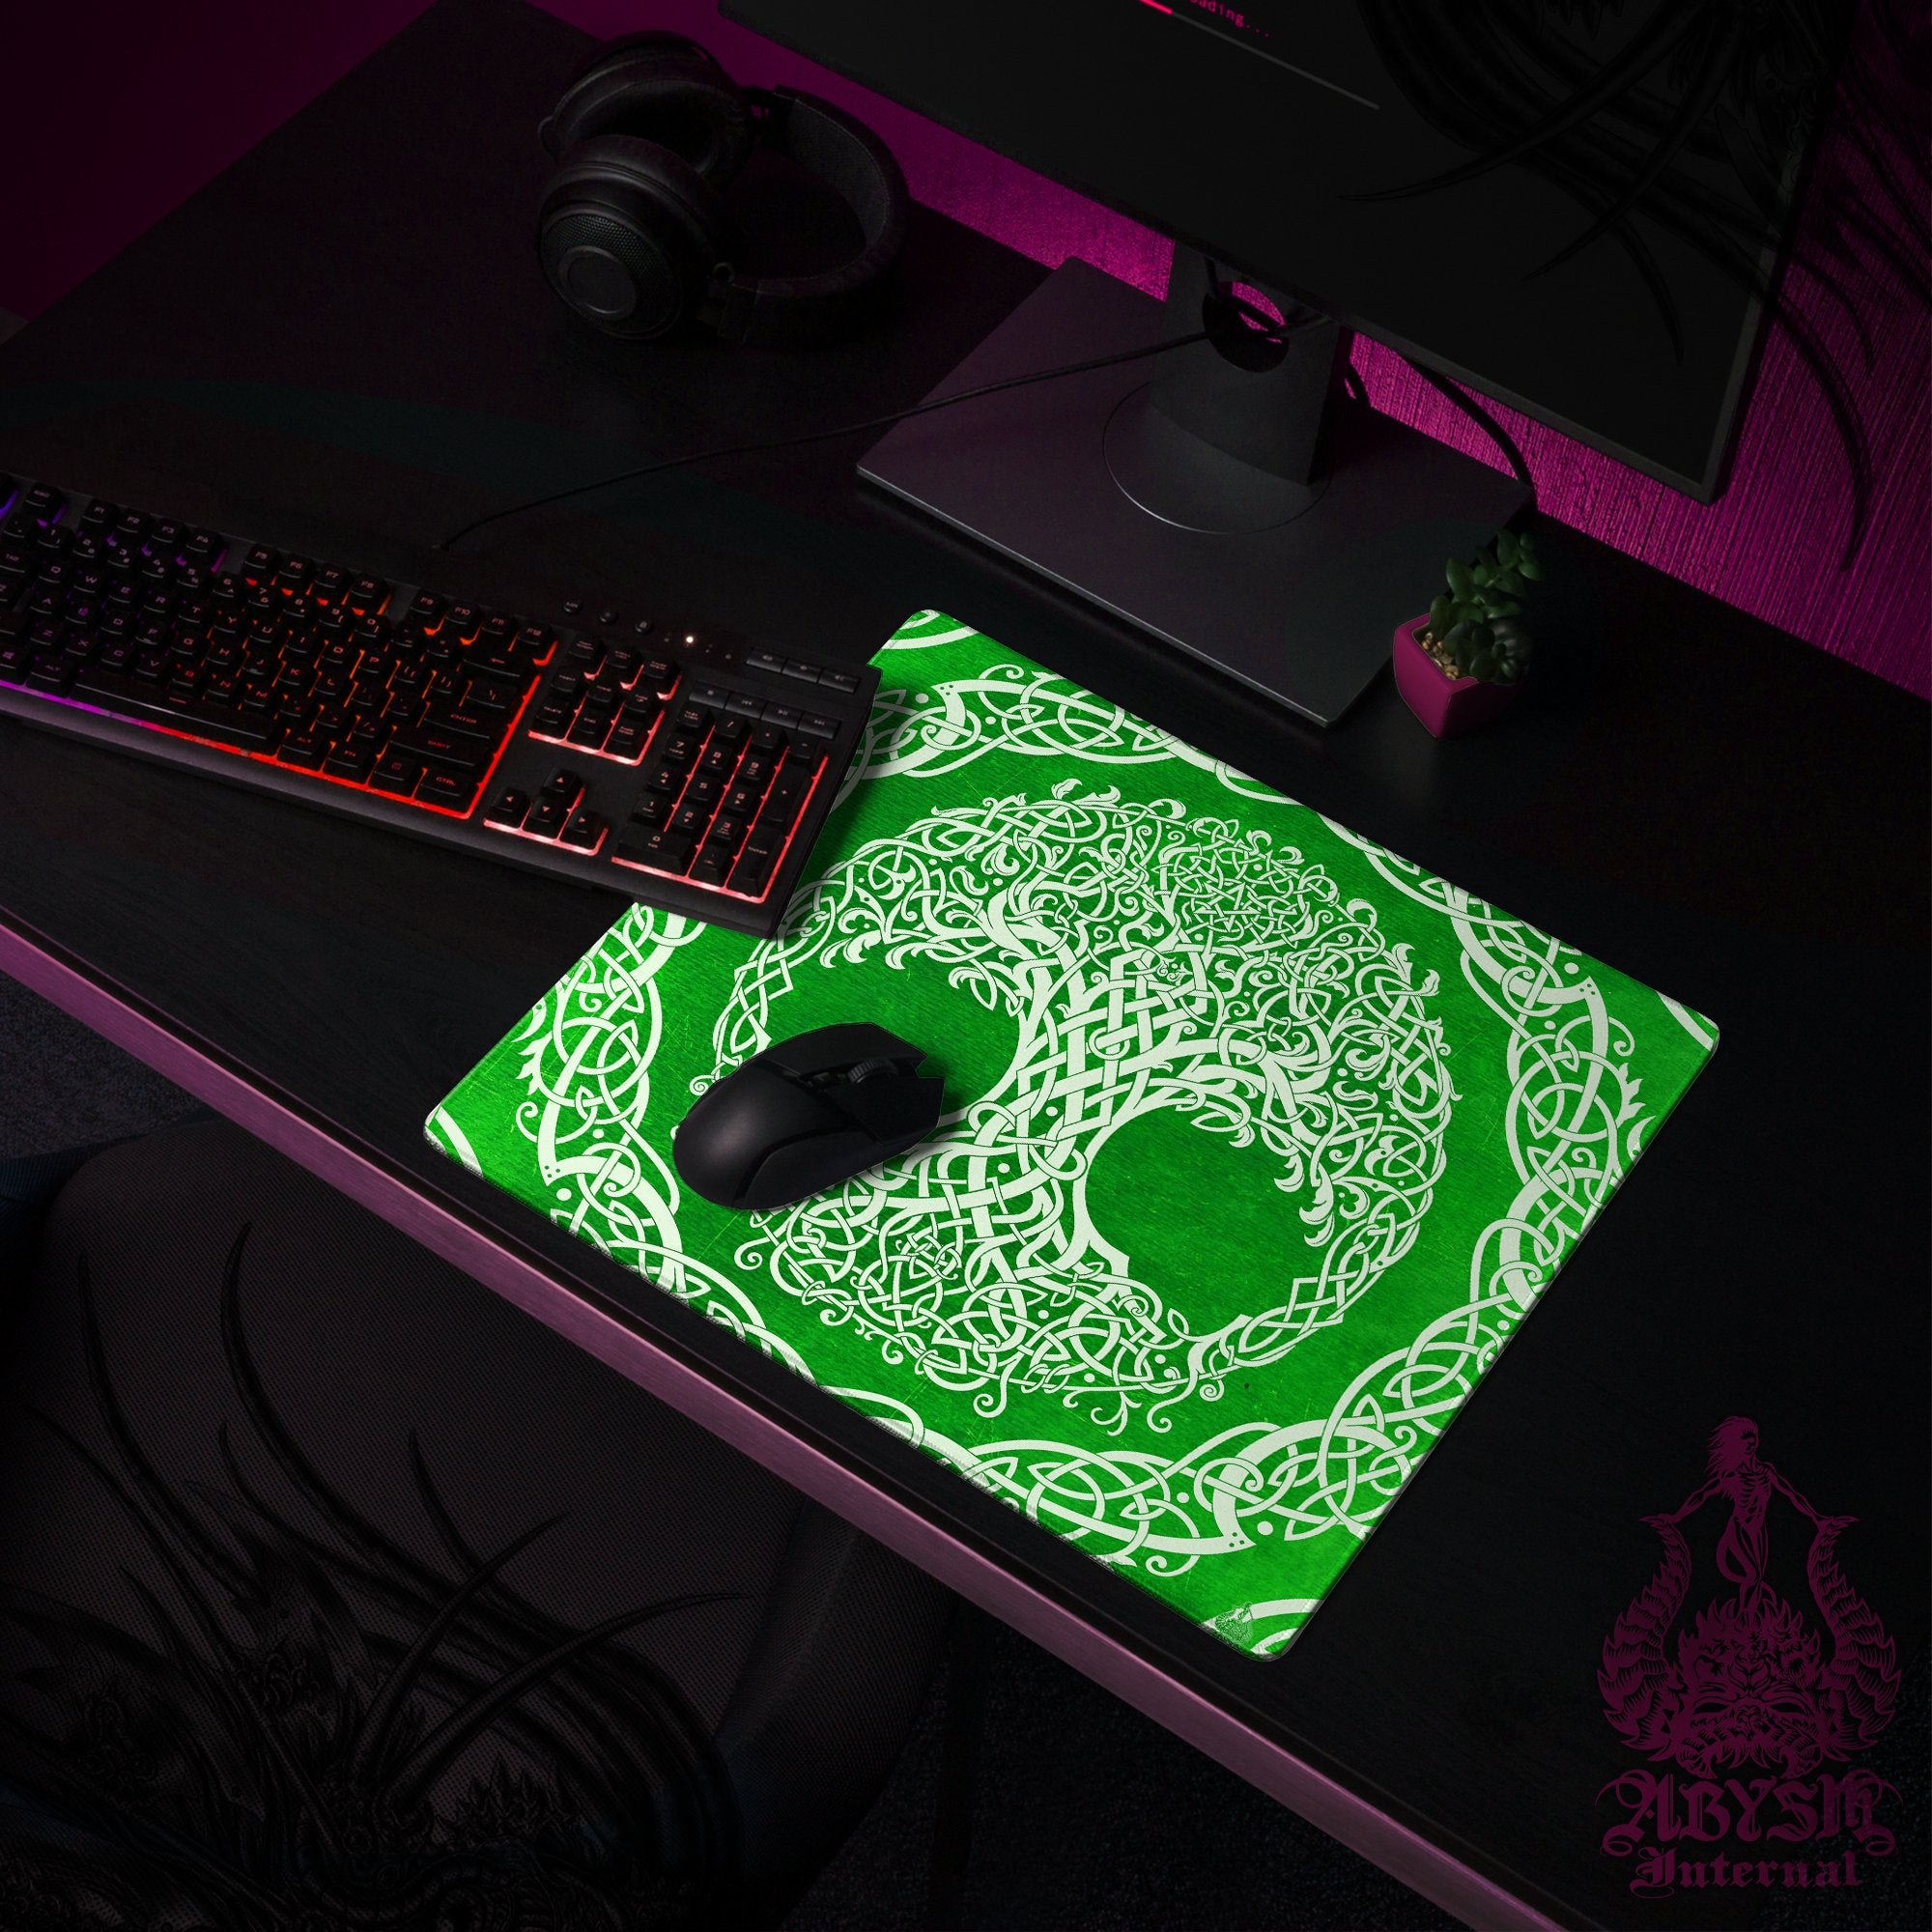 Tree of Life Desk Mat, Celtic Knotwork Gaming Mouse Pad, Wicca Table Protector Cover, Indie Workpad, Boho Art Print - Psy, Green White, Paper, 3 Colors - Abysm Internal